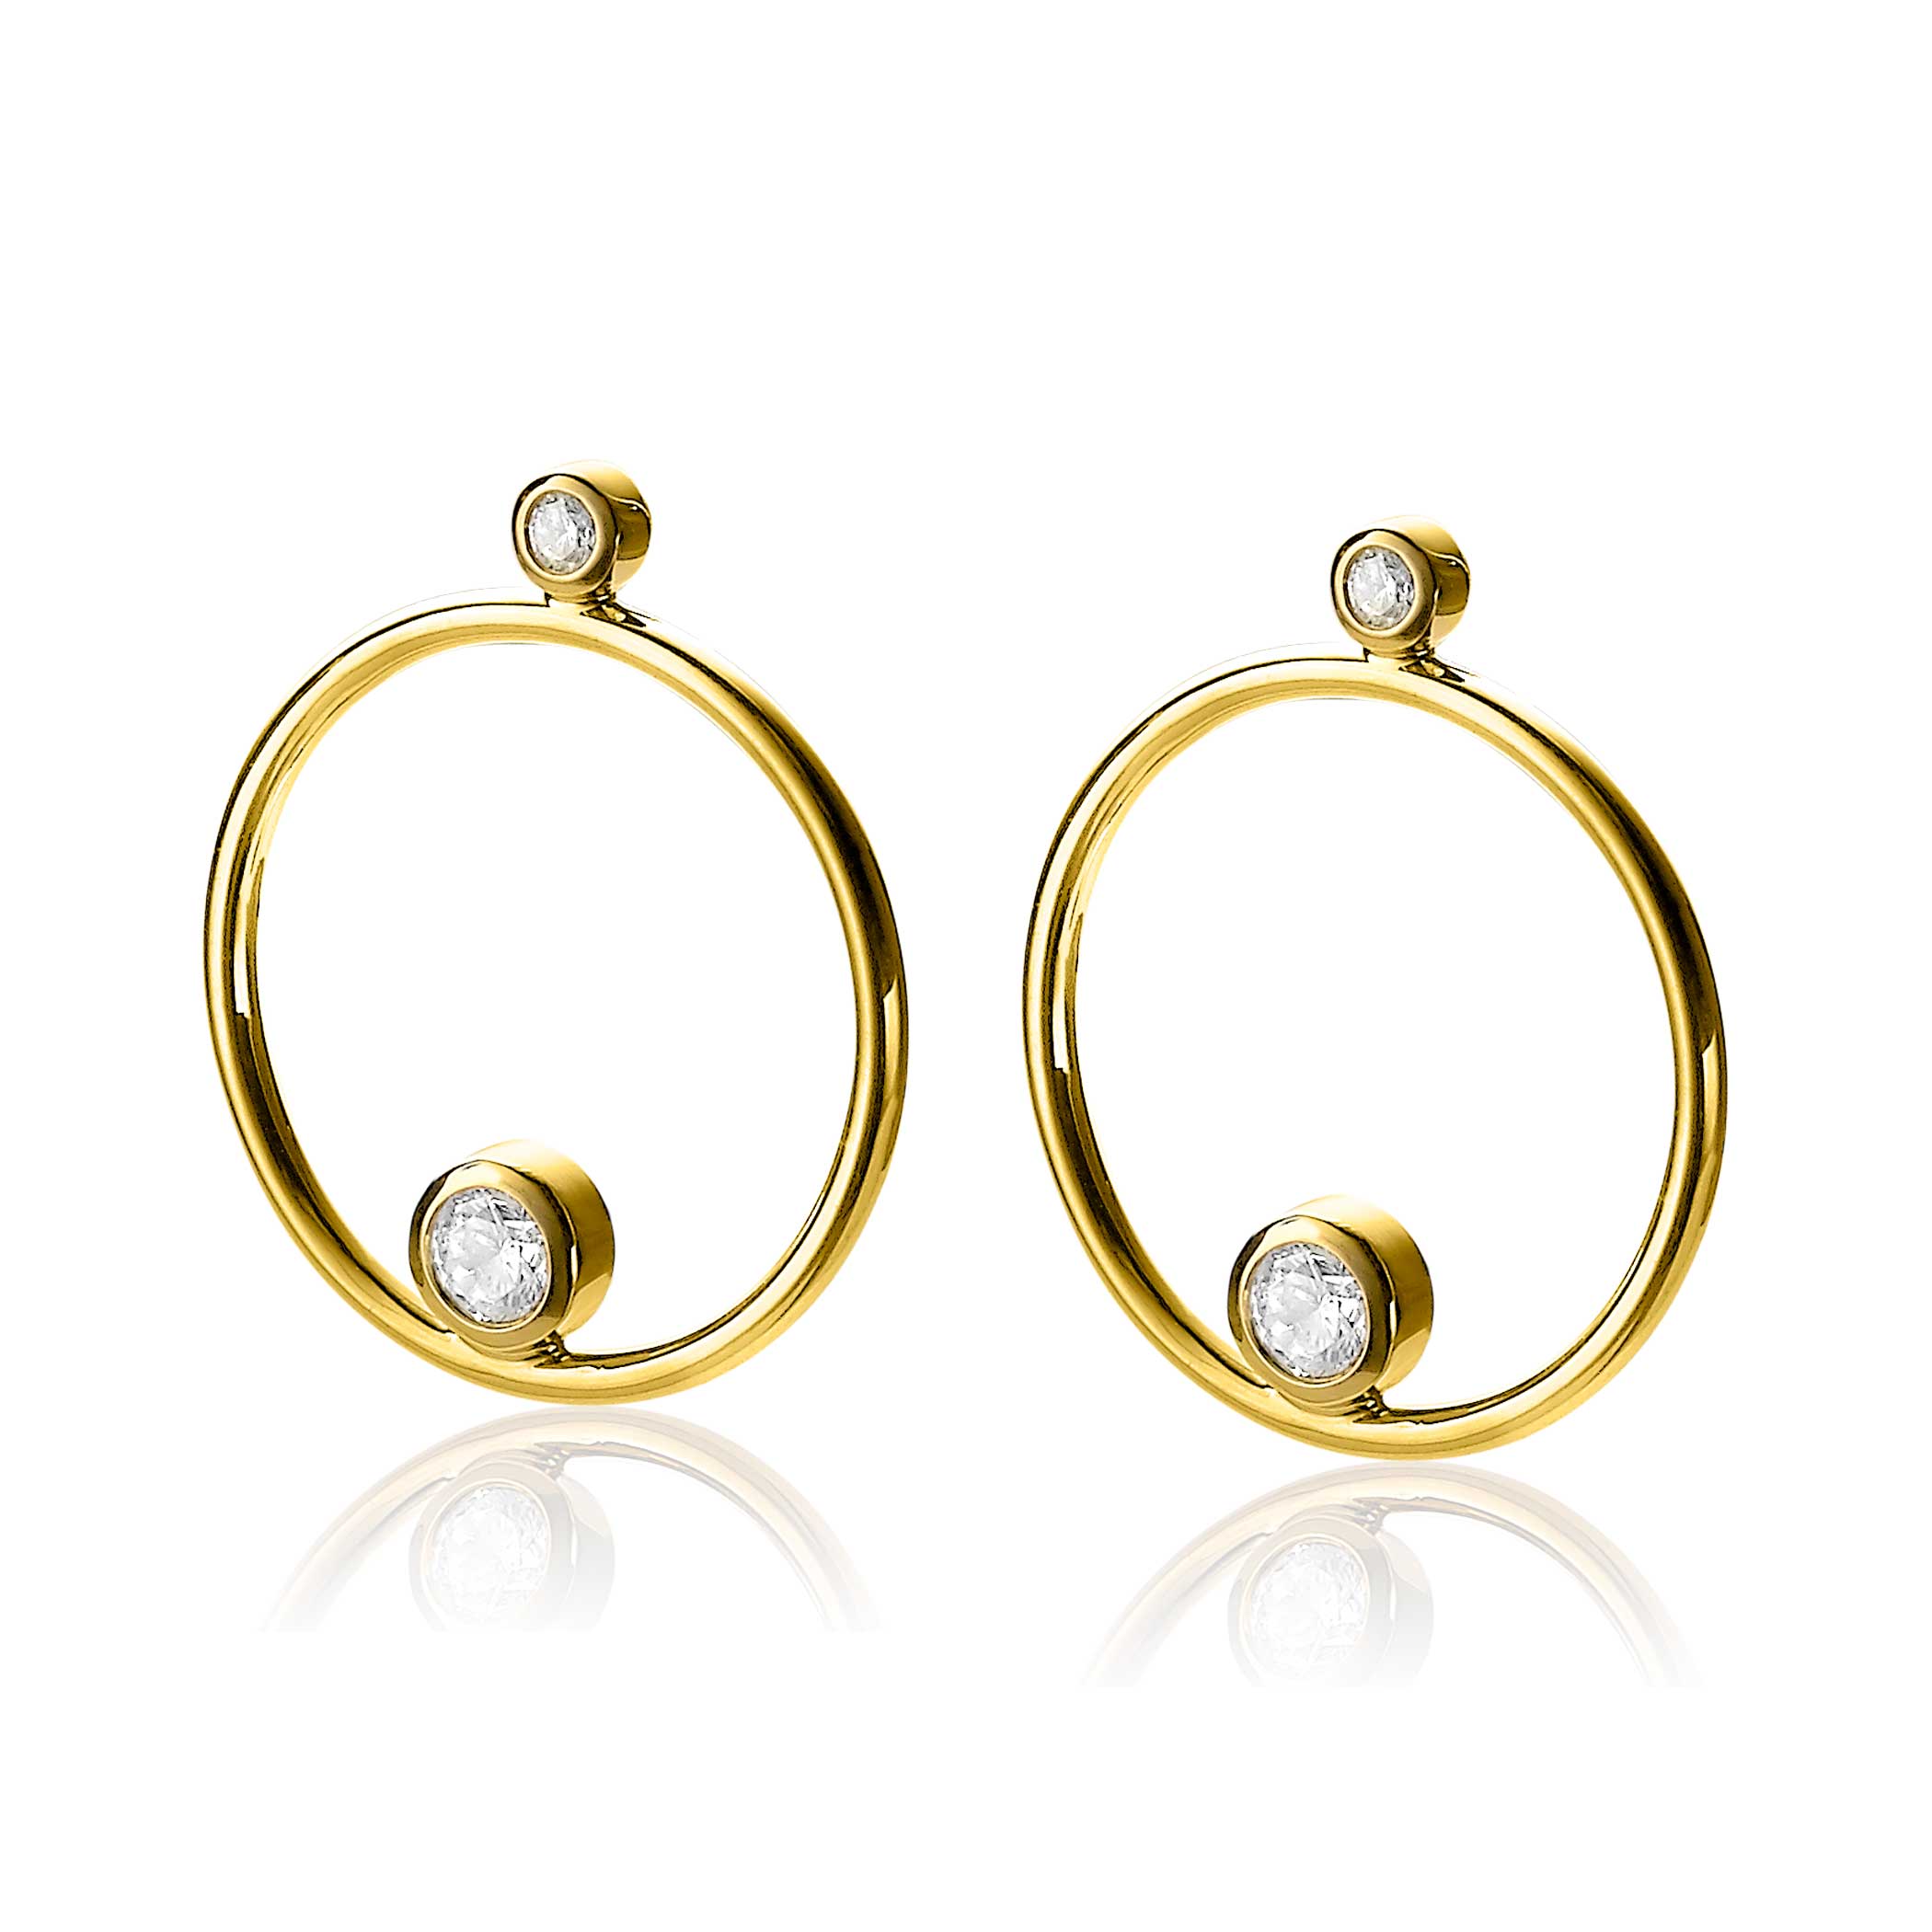 20mm ZINZI Gold Plated Sterling Silver Earrings Round White ZIO1897G